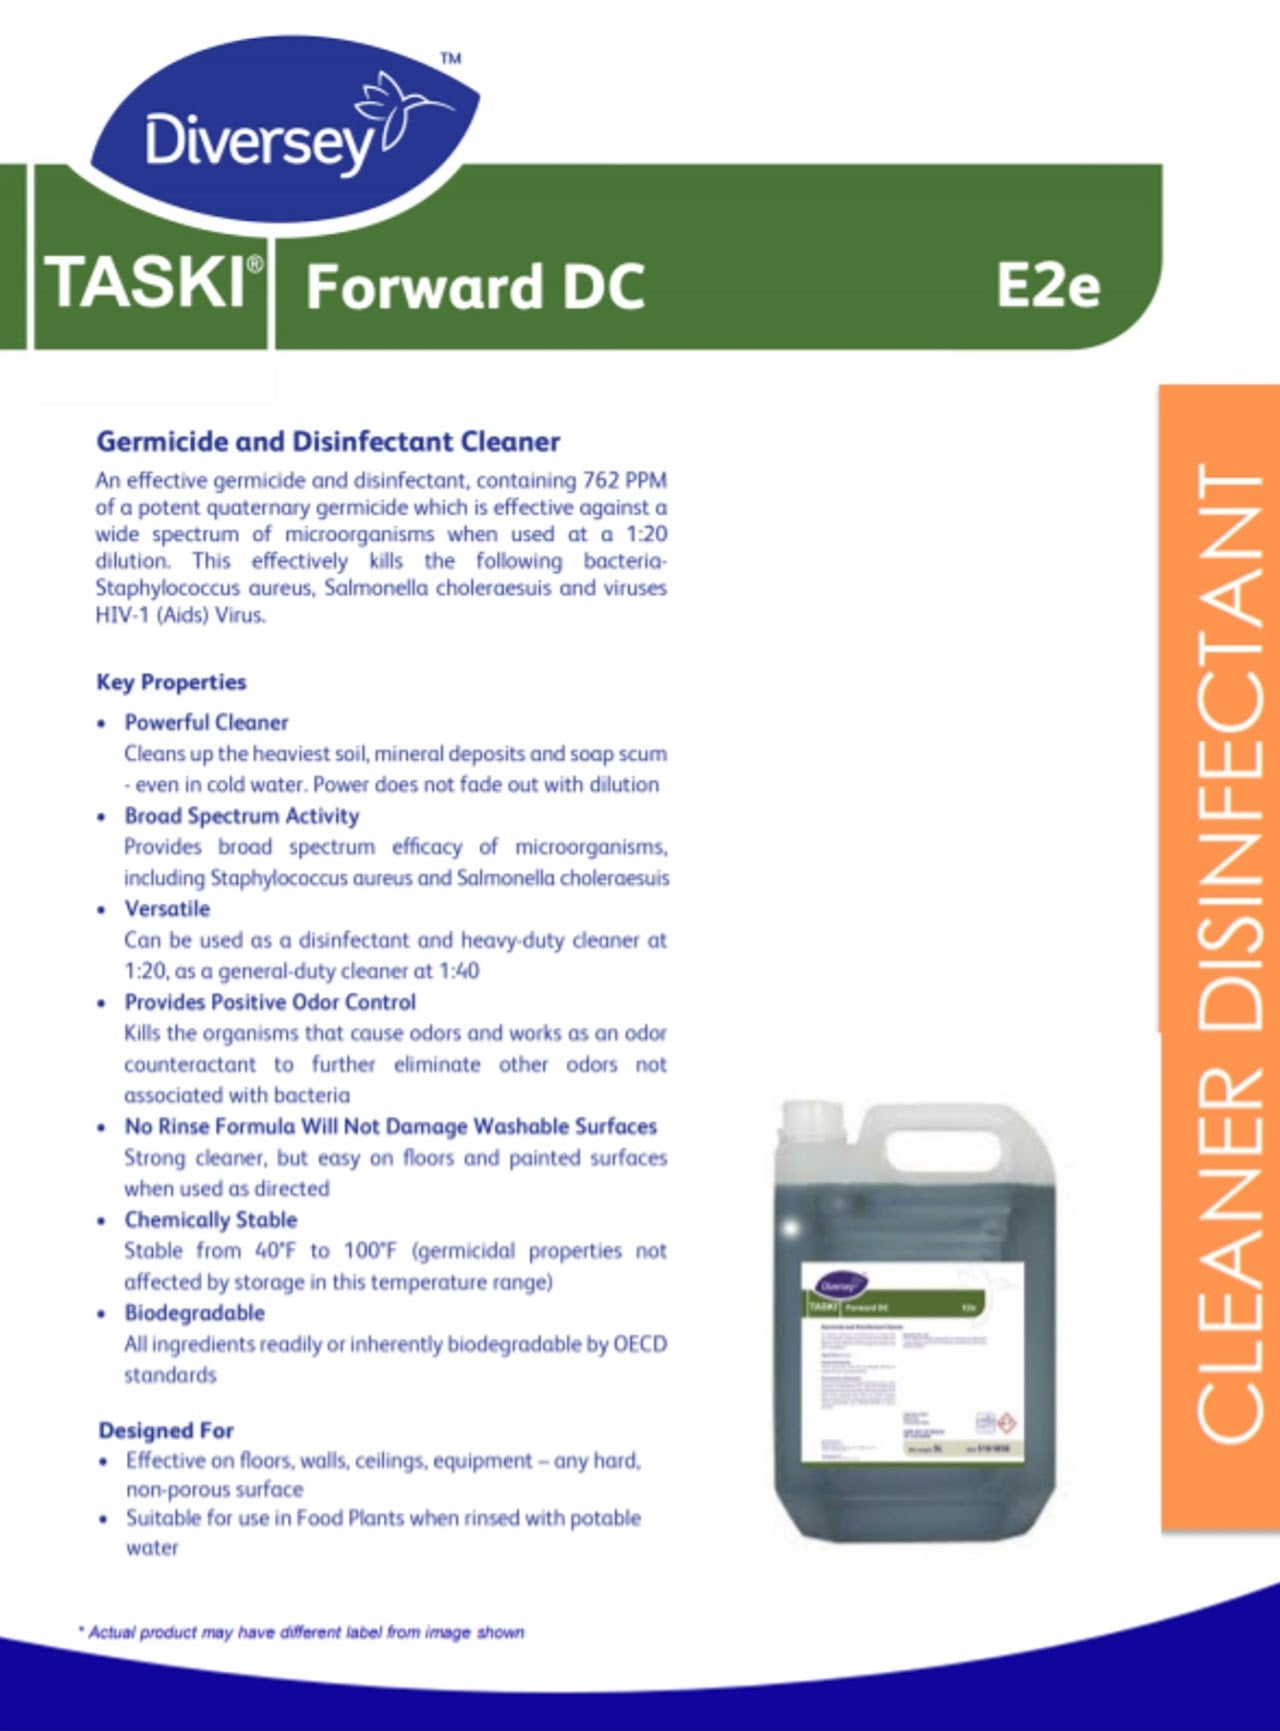 Diversey™ TASKI® Forward DC (5L) E2e Germicide & Disinfectant Cleaner For Professional Use